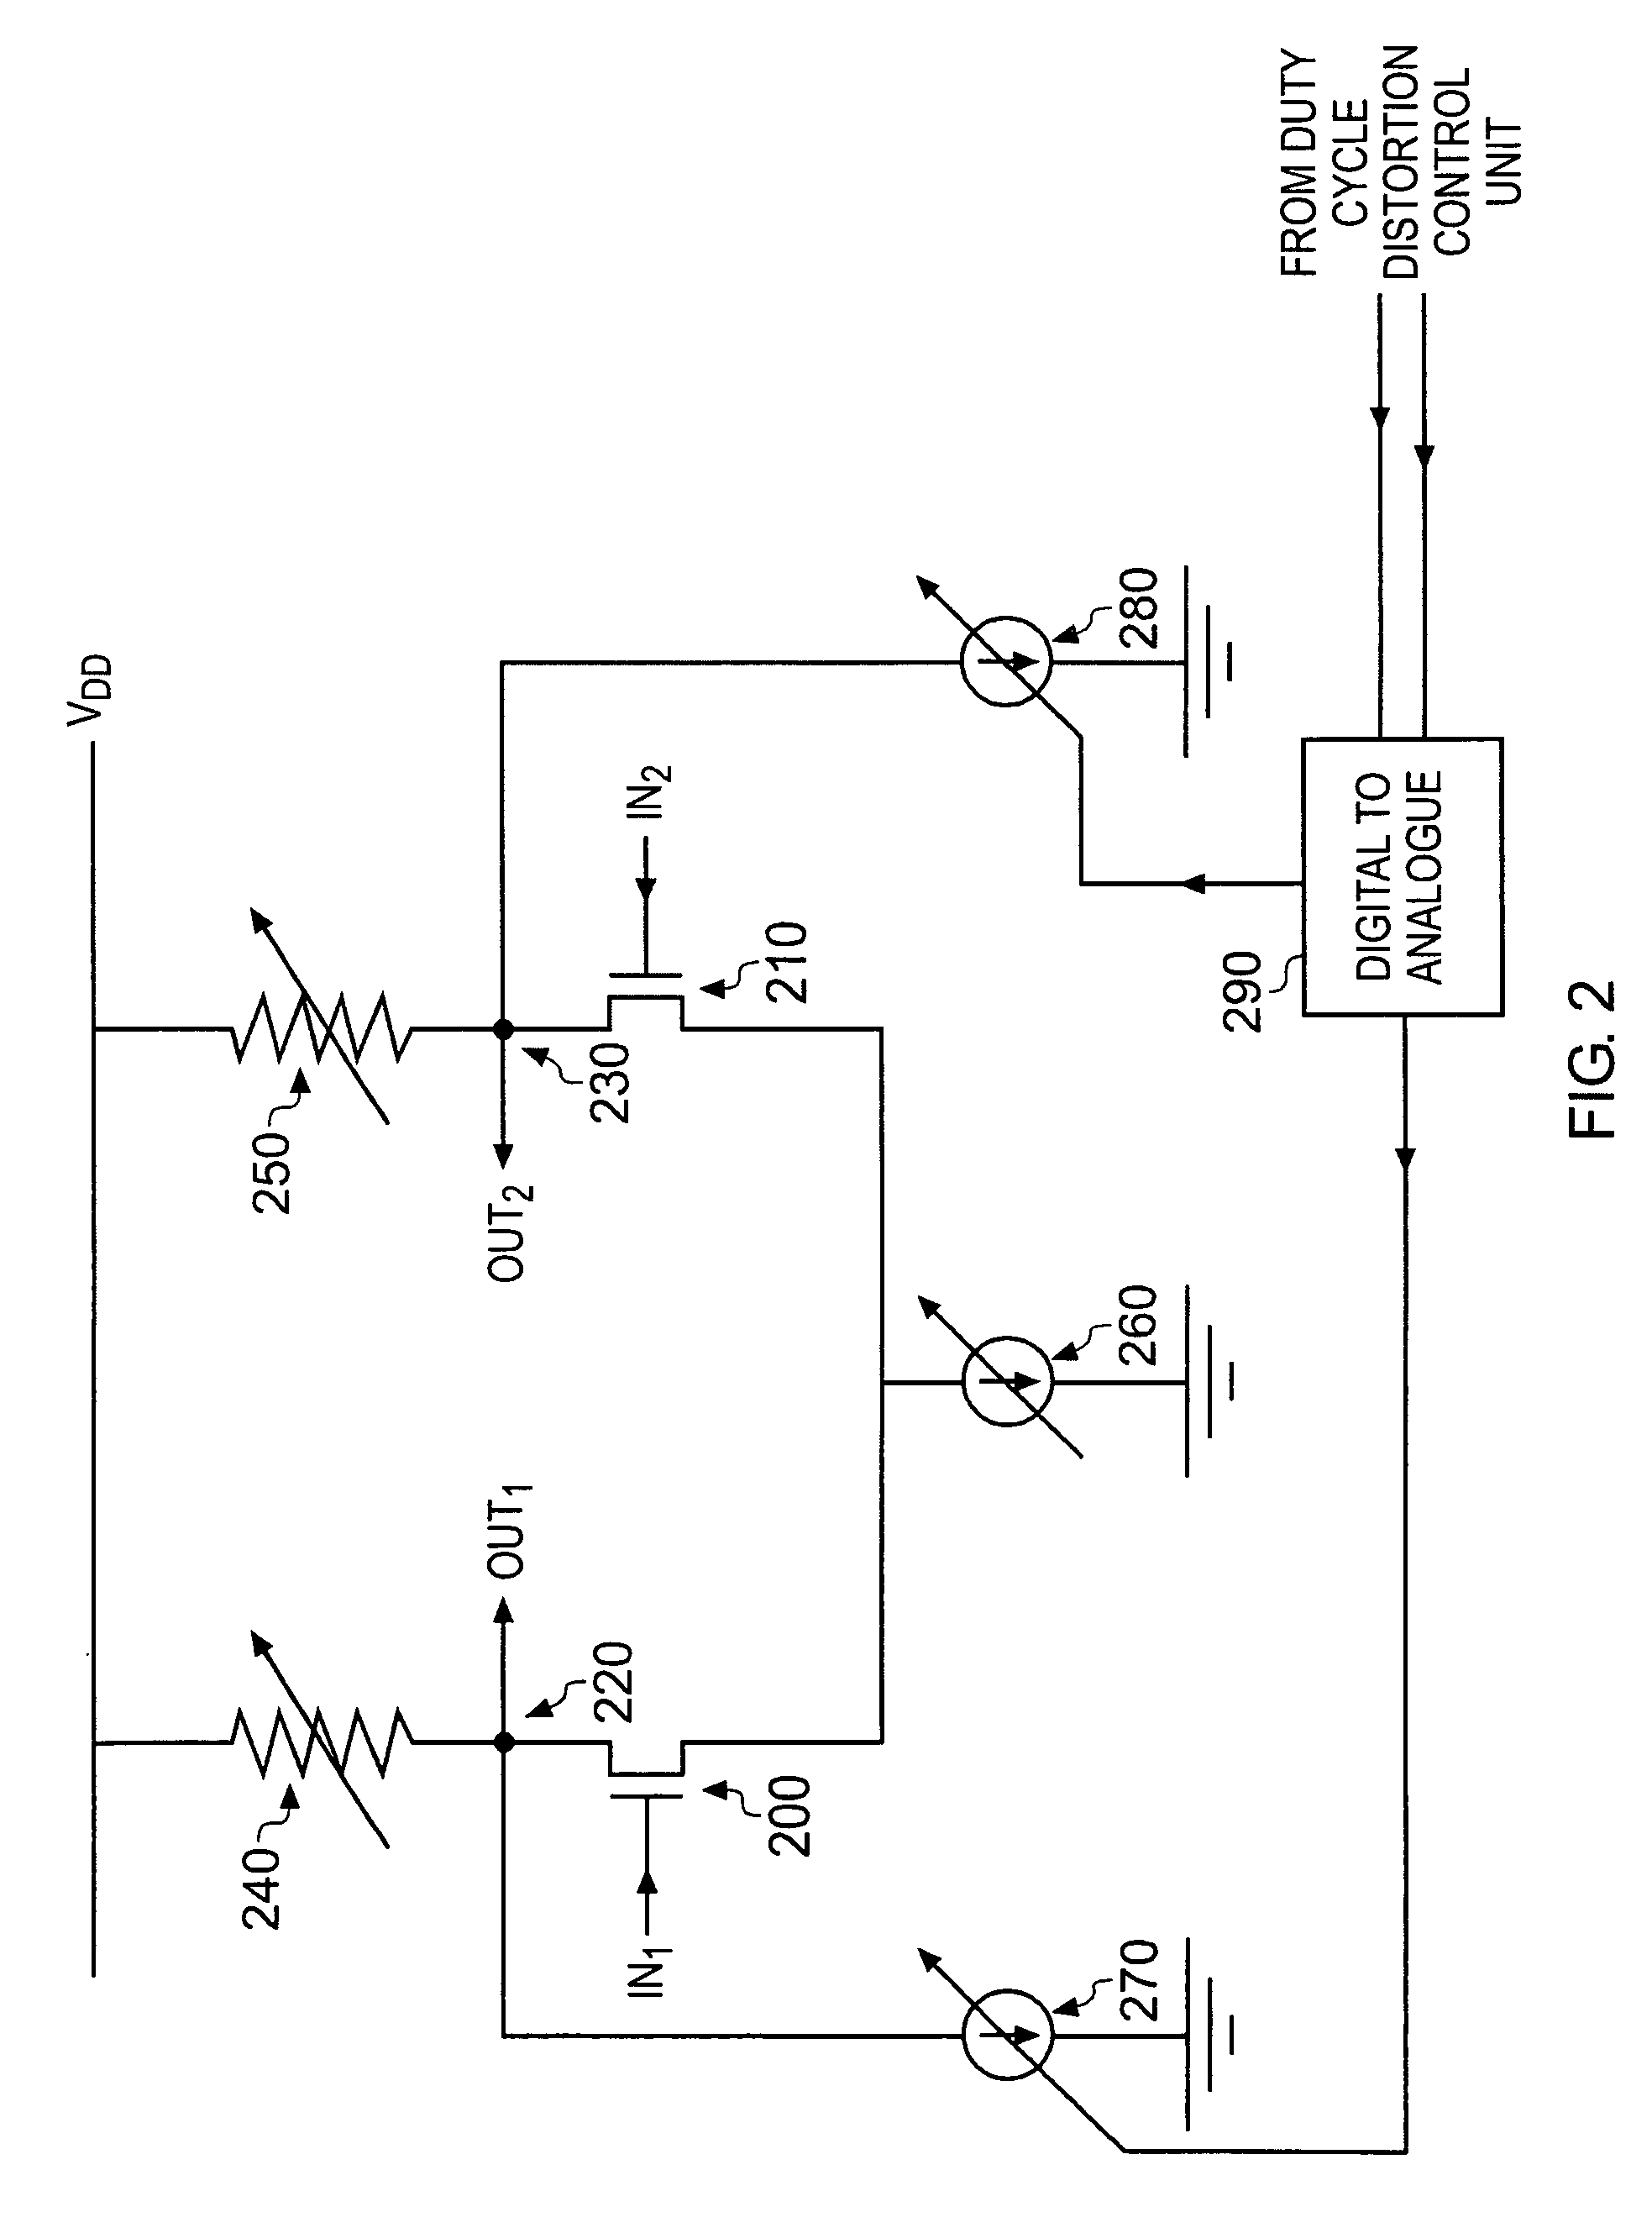 Programmable duty cycle distortion generation circuit